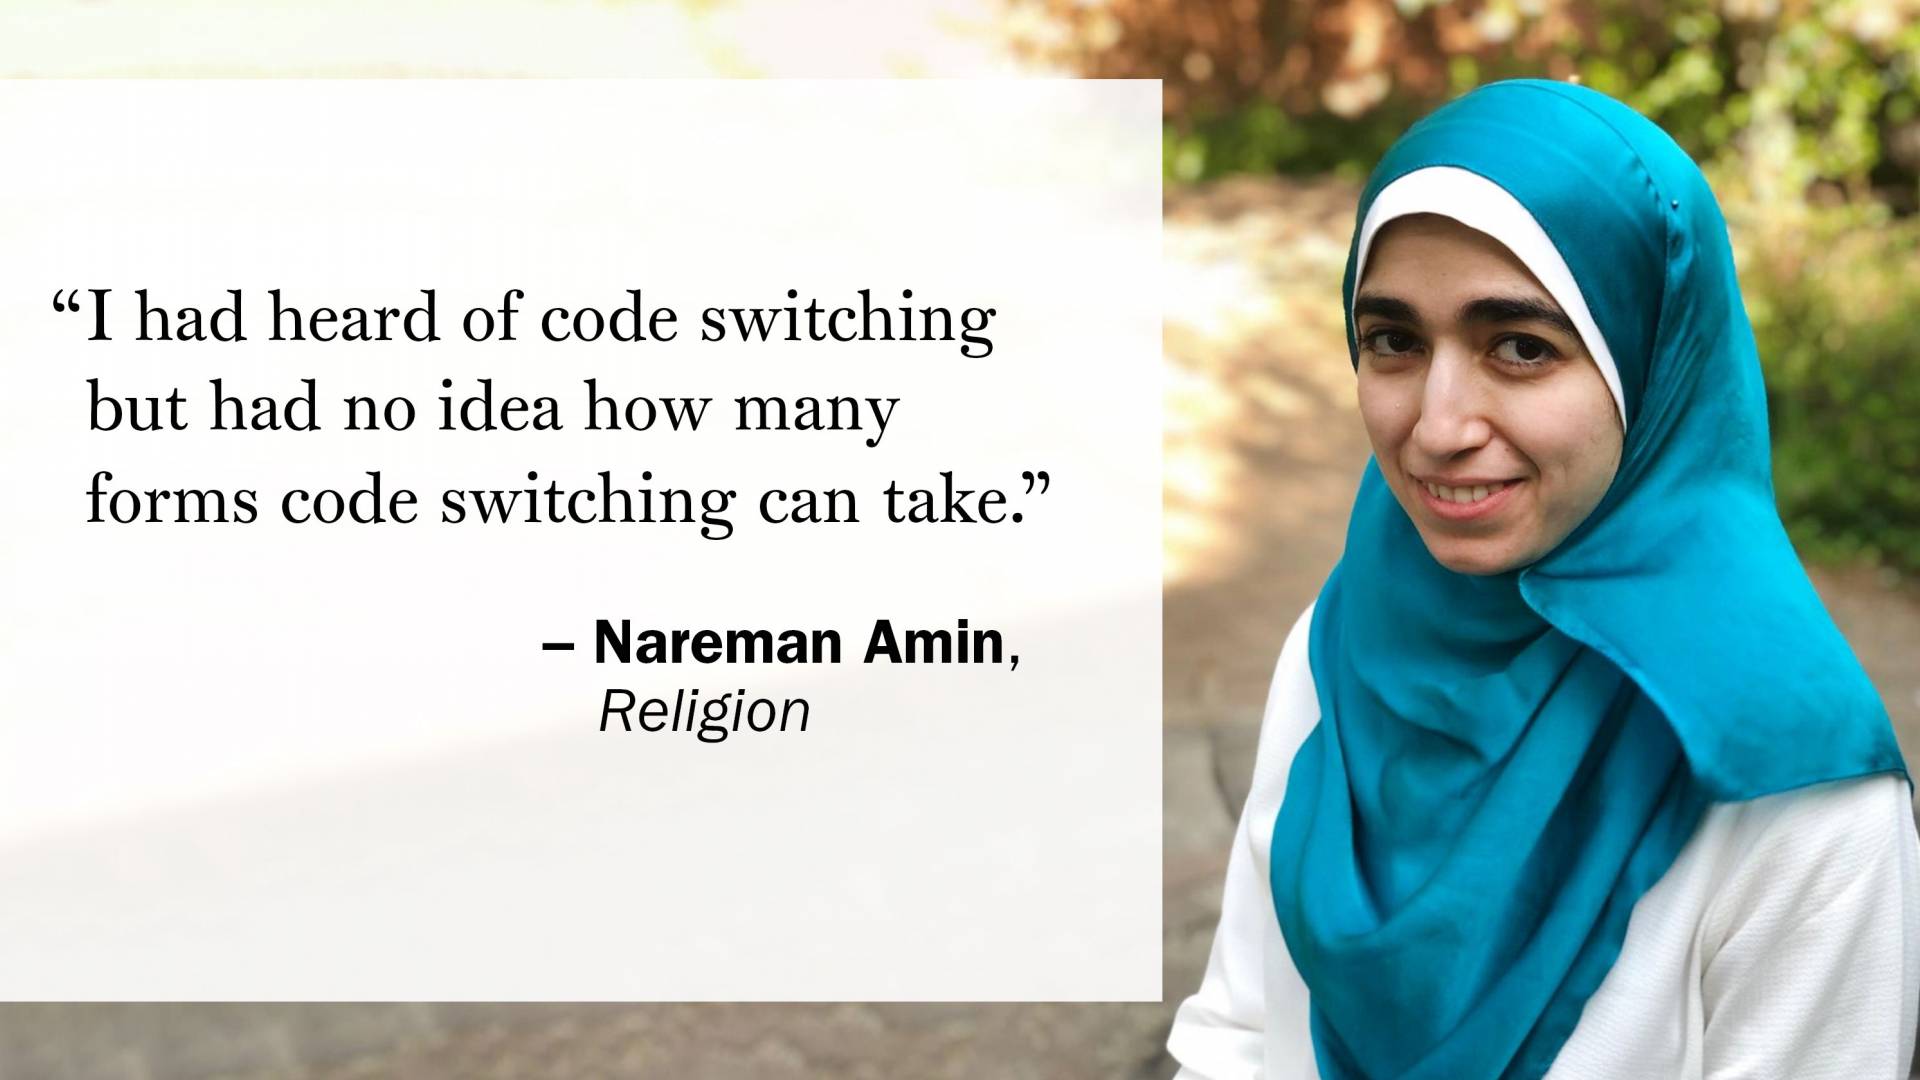 "I had heard of code switching but had no idea how many forms code switching can take." —Nareman Amin, Religion